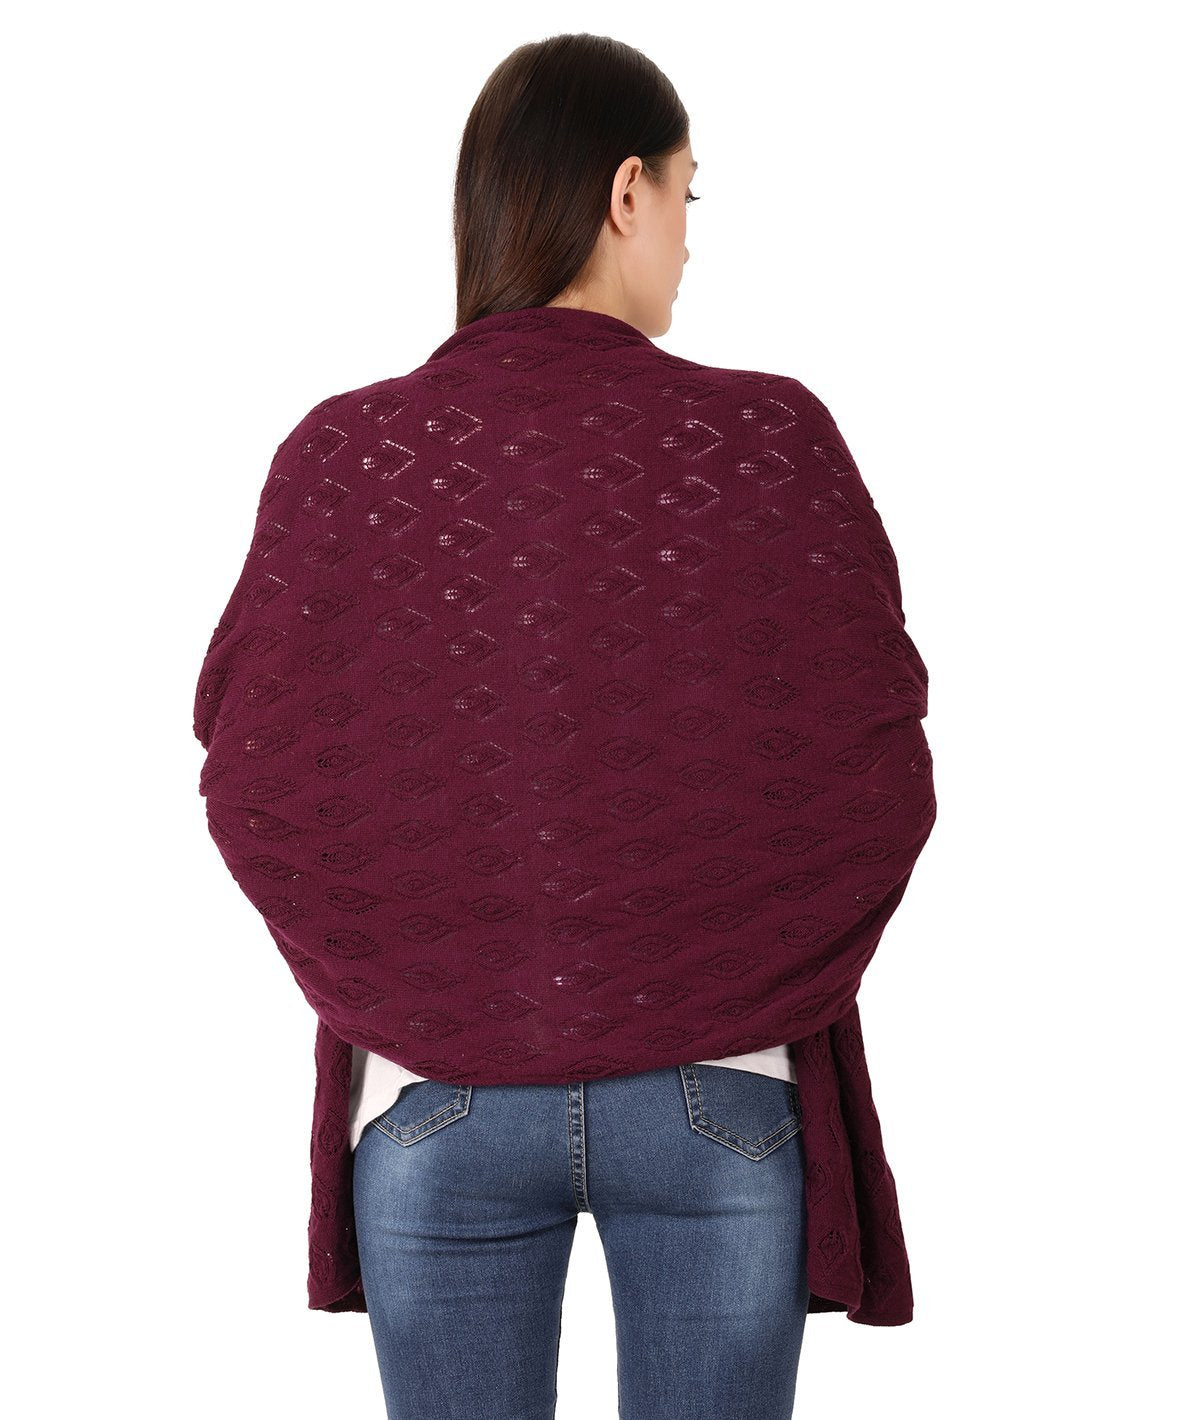 Avery - Aubergine Color Lambswool & Nylon Knitted Shawl Wrap